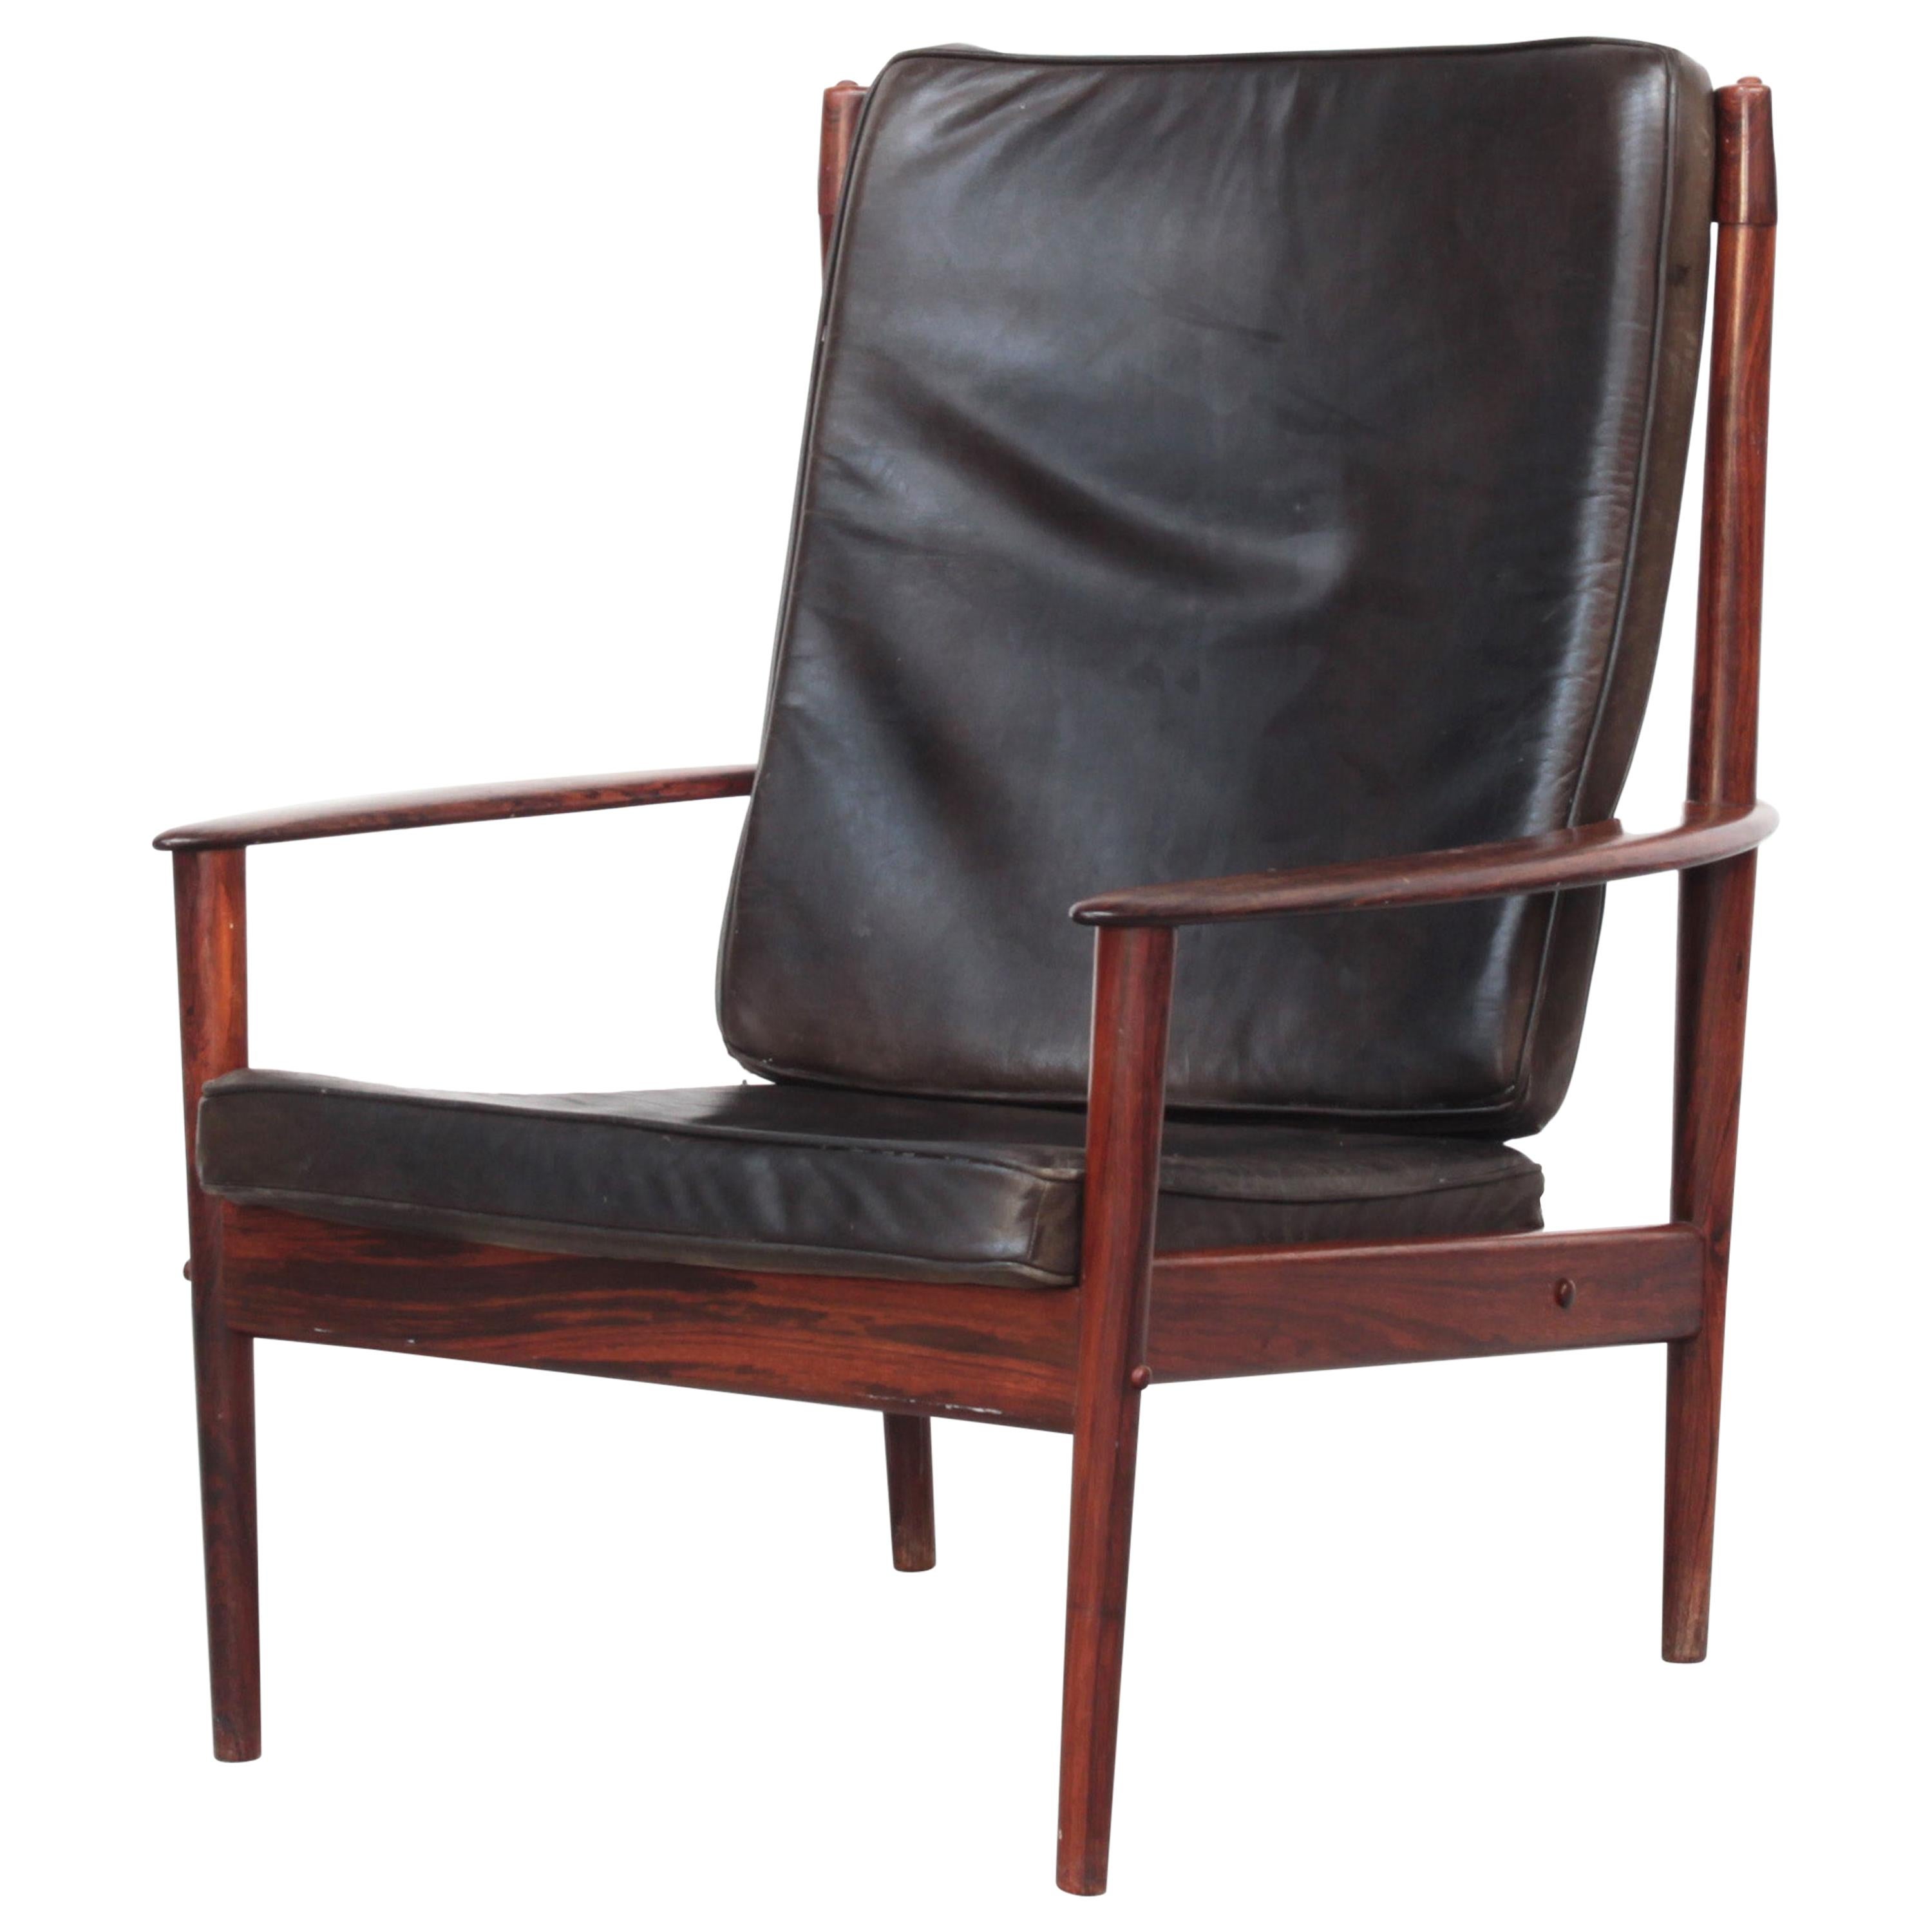 Beautiful Danish Lounge Easy Chair by Grete Jalk for P. Jeppesen in Leather